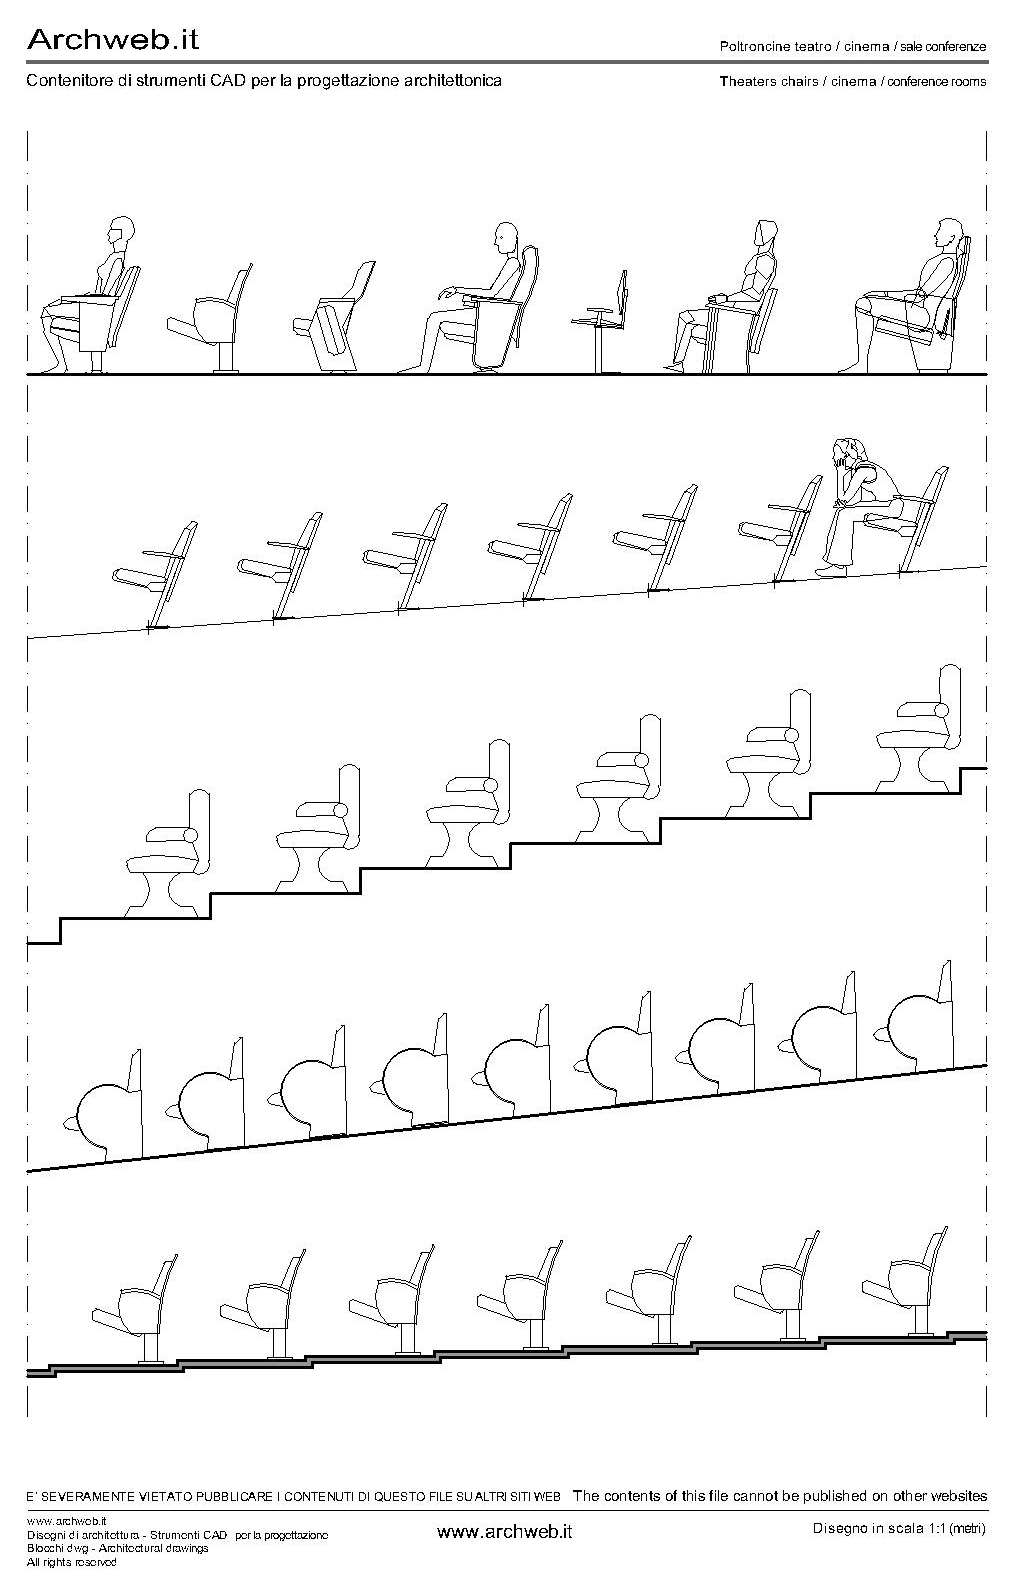 Design of the seating of various conference rooms